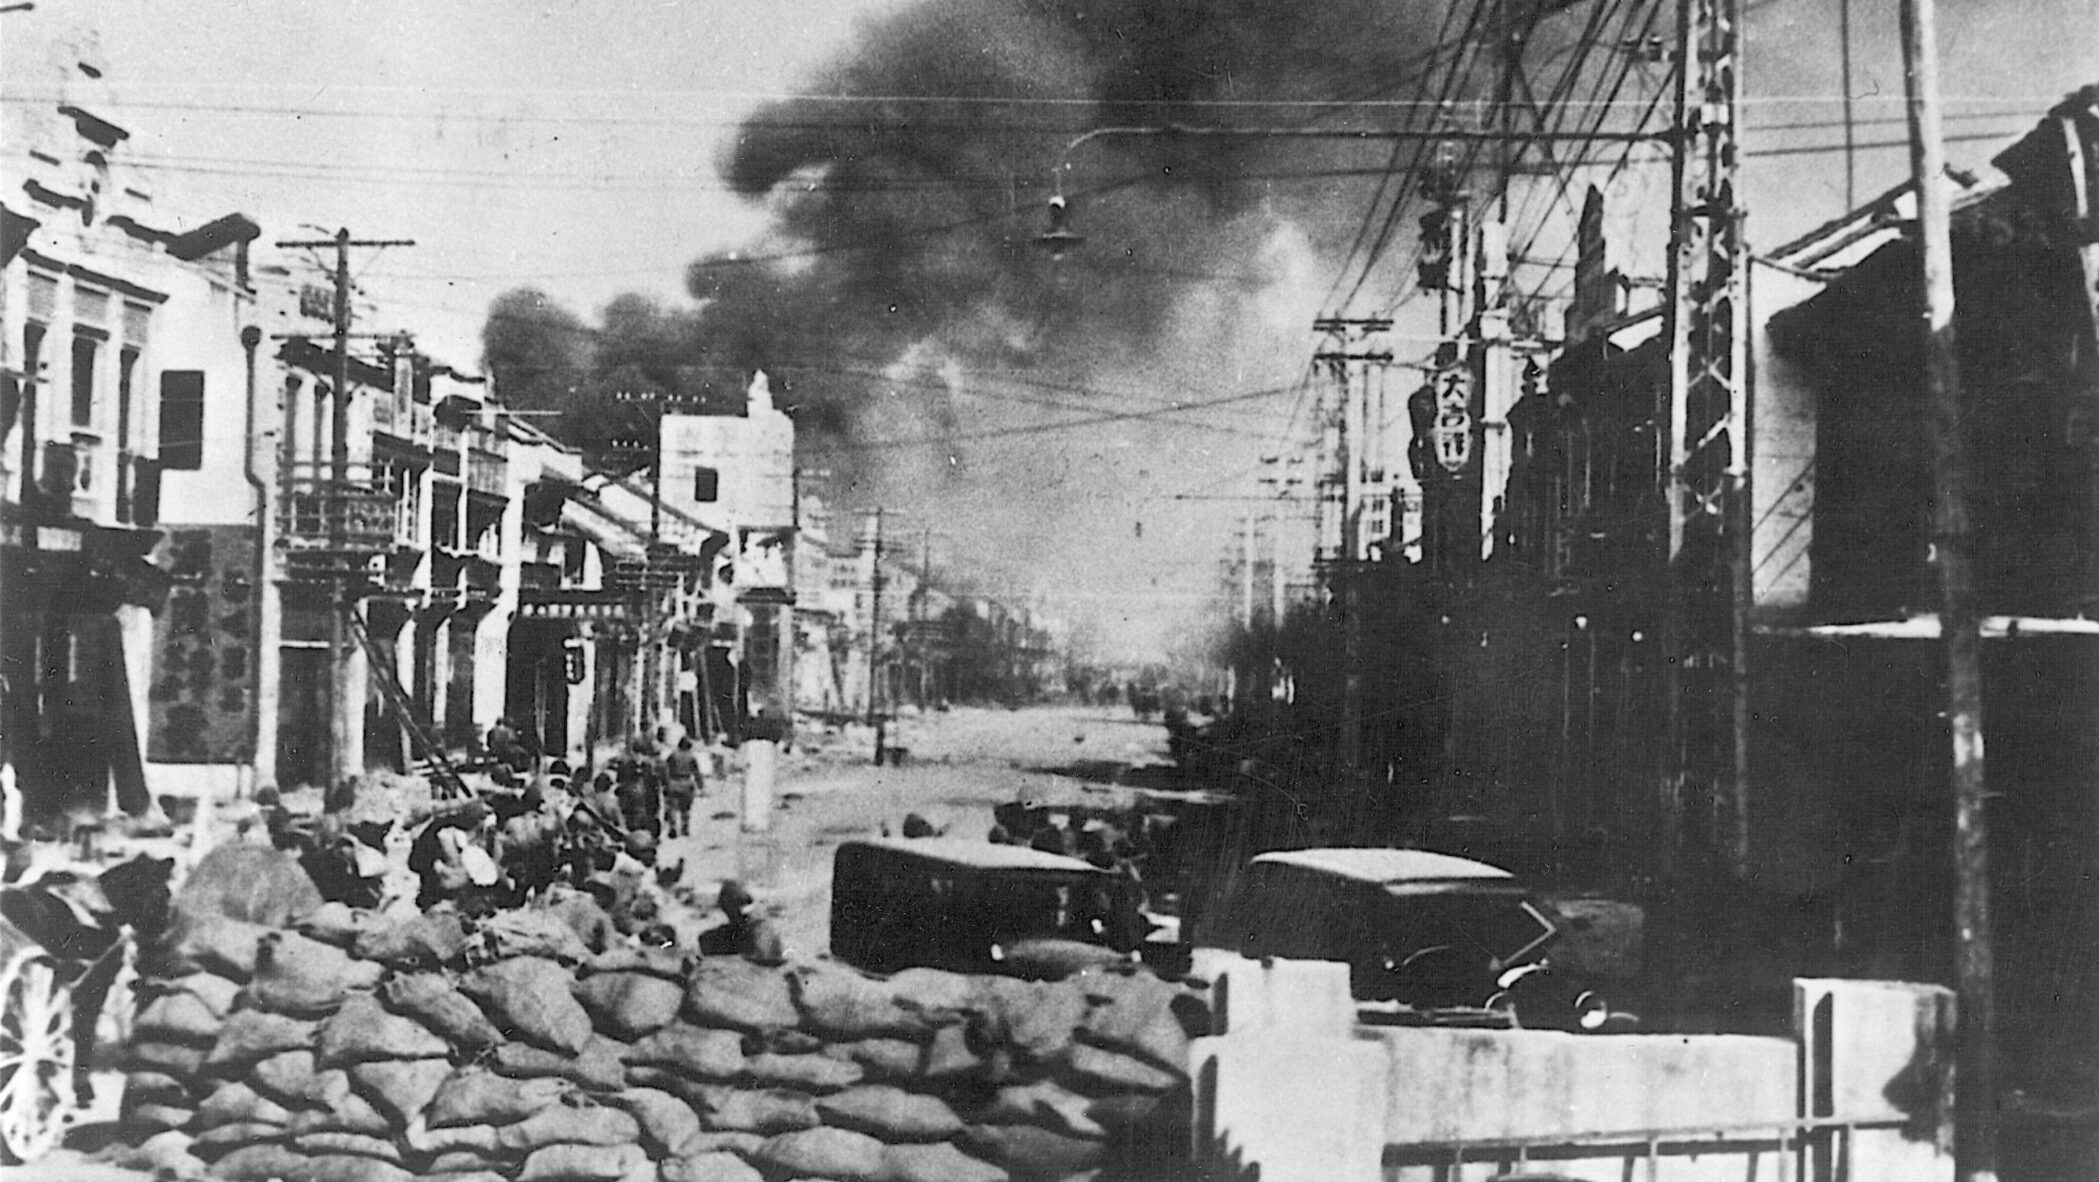 Smoke billows from a raging fire in the distance as Japanese troops occupy a barrier in a Nanking street, which was once defended by Chinese soldiers. The 1937 Rape of Nanking was a tragic chapter in the history of Sino-Japanese relations.